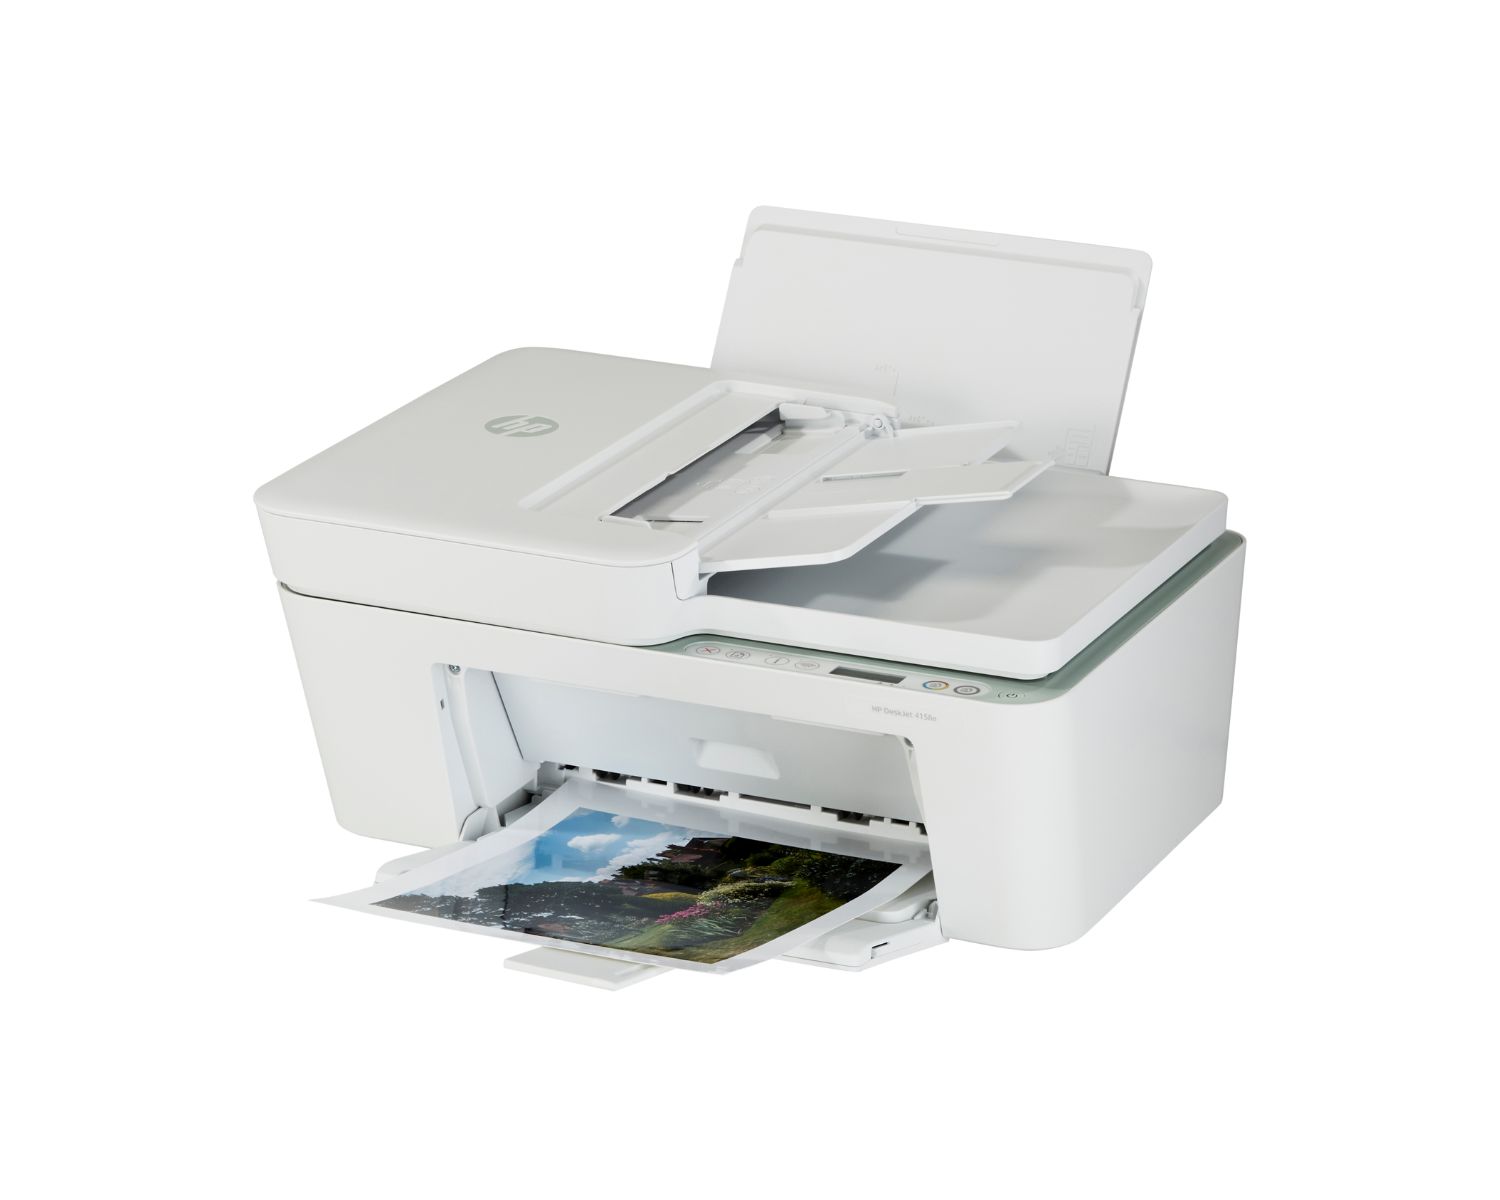 How To Put Photo Paper In A HP Printer